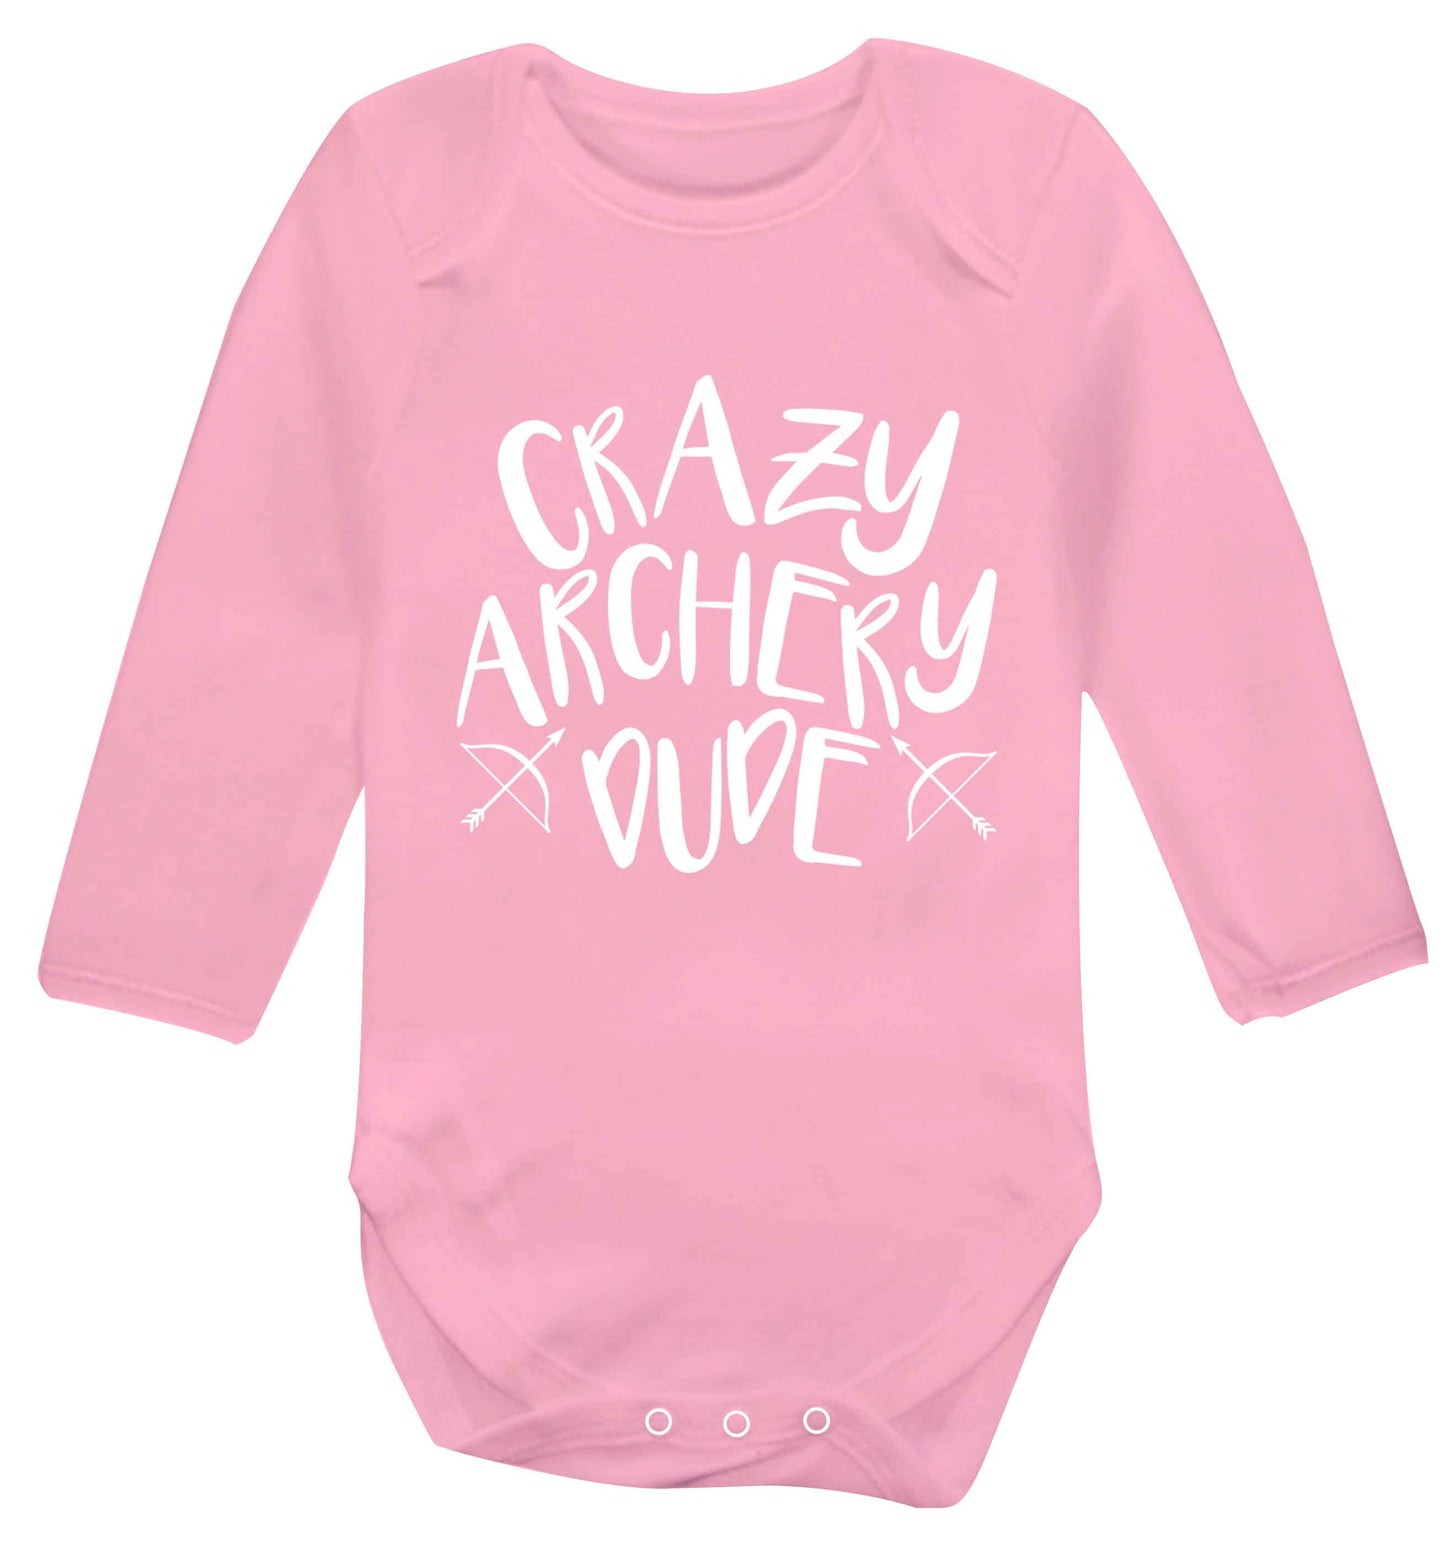 Crazy archery dude Baby Vest long sleeved pale pink 6-12 months